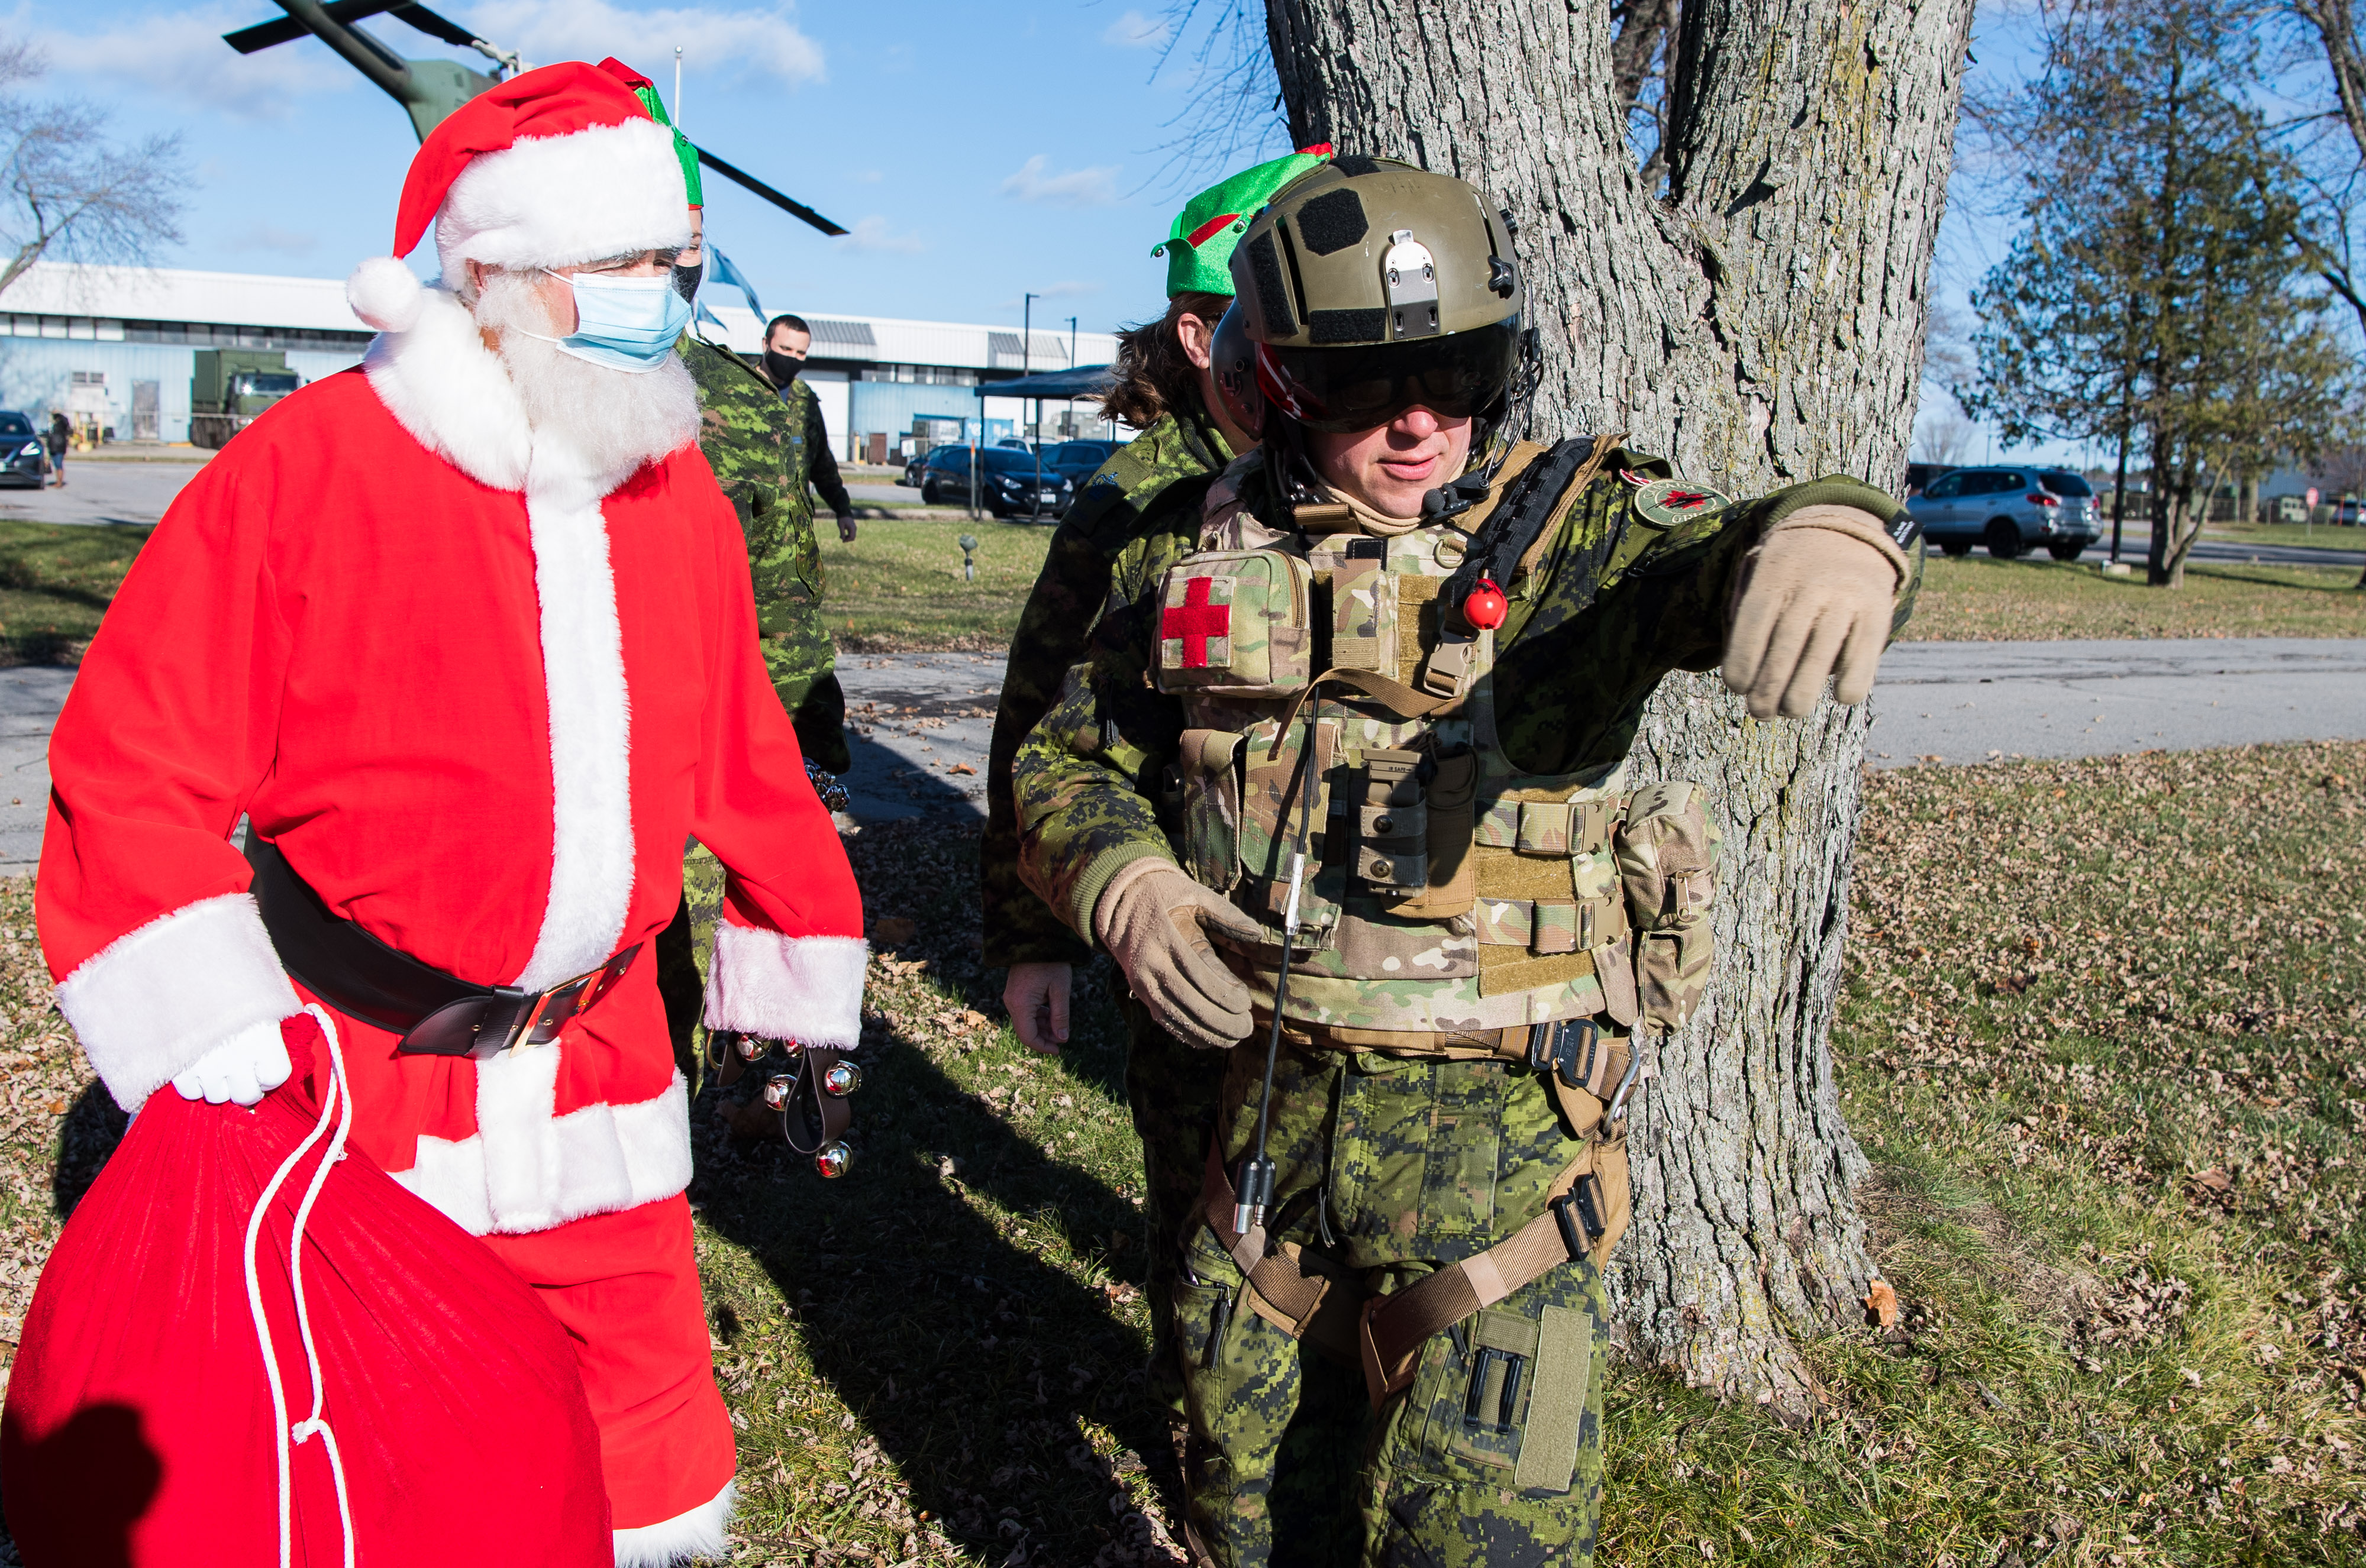 Santa with the help of a One Wing Air Lift and some elves volunteering from Canadian Forces Base Kingston delivers some presents to the children at Kingston General Hospital. Canadian Forces Base Kingston, Ontario. 03 December, 2021.